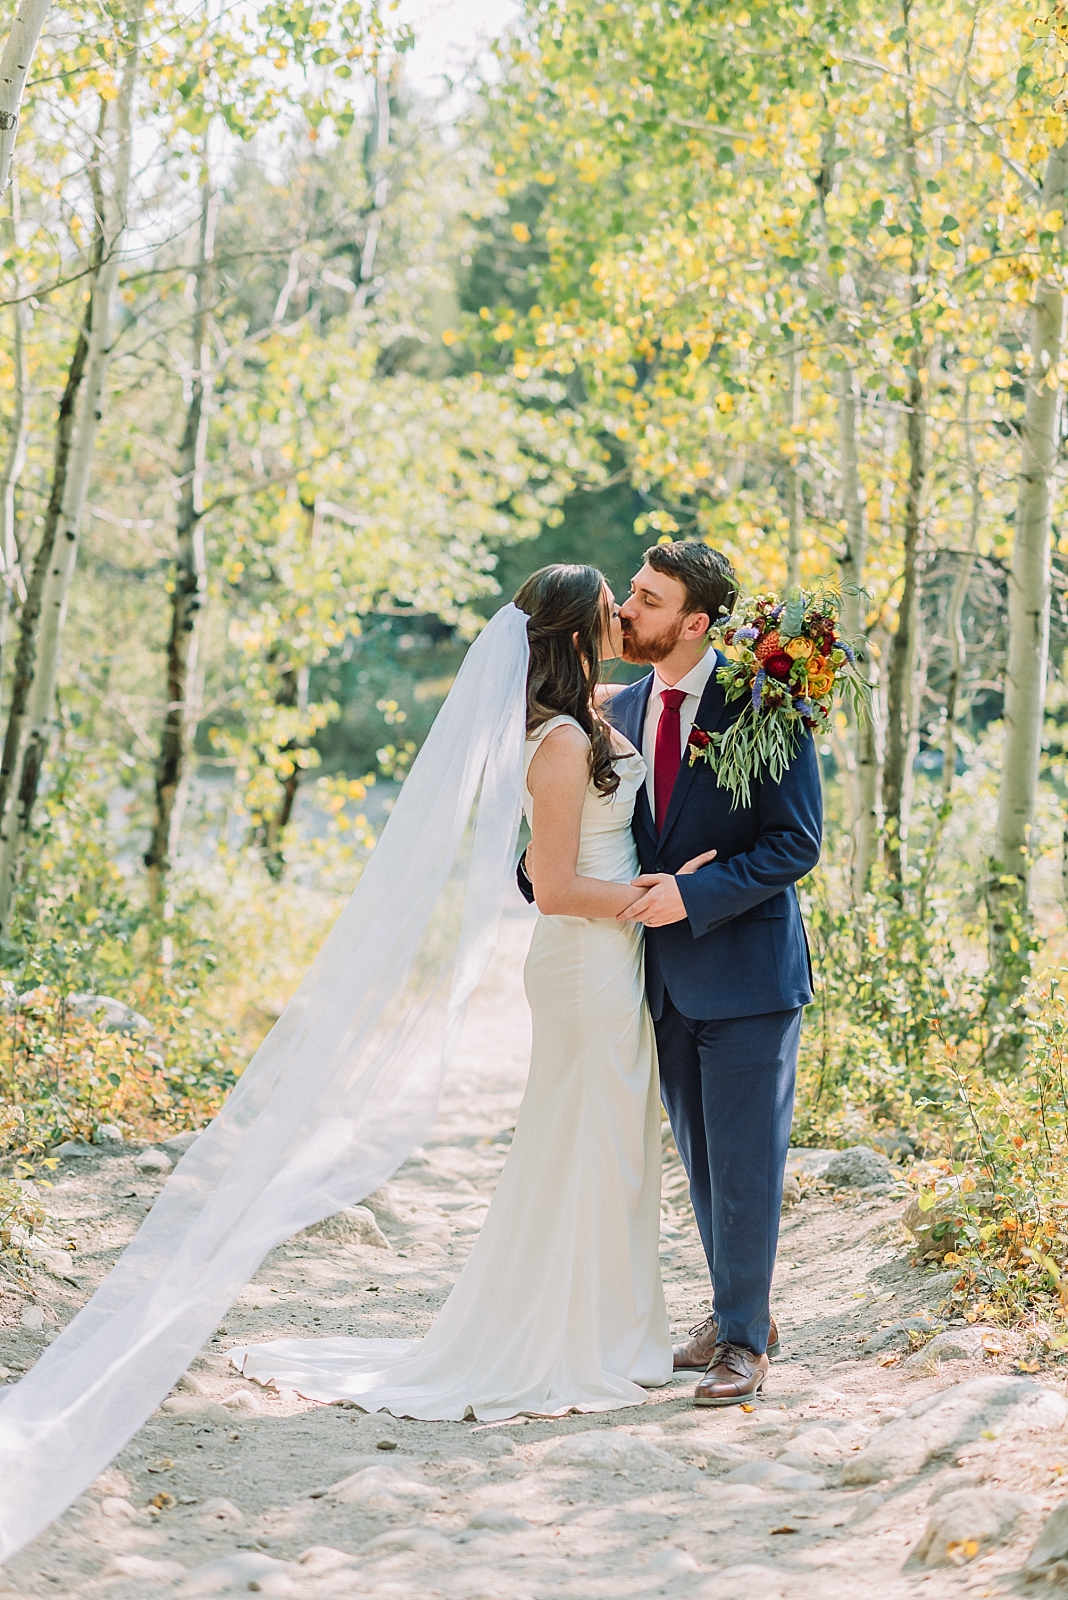 outdoor adventurous wedding portraits, jackson hole wedding photography, intimate elopement, wedding portraits in the forest